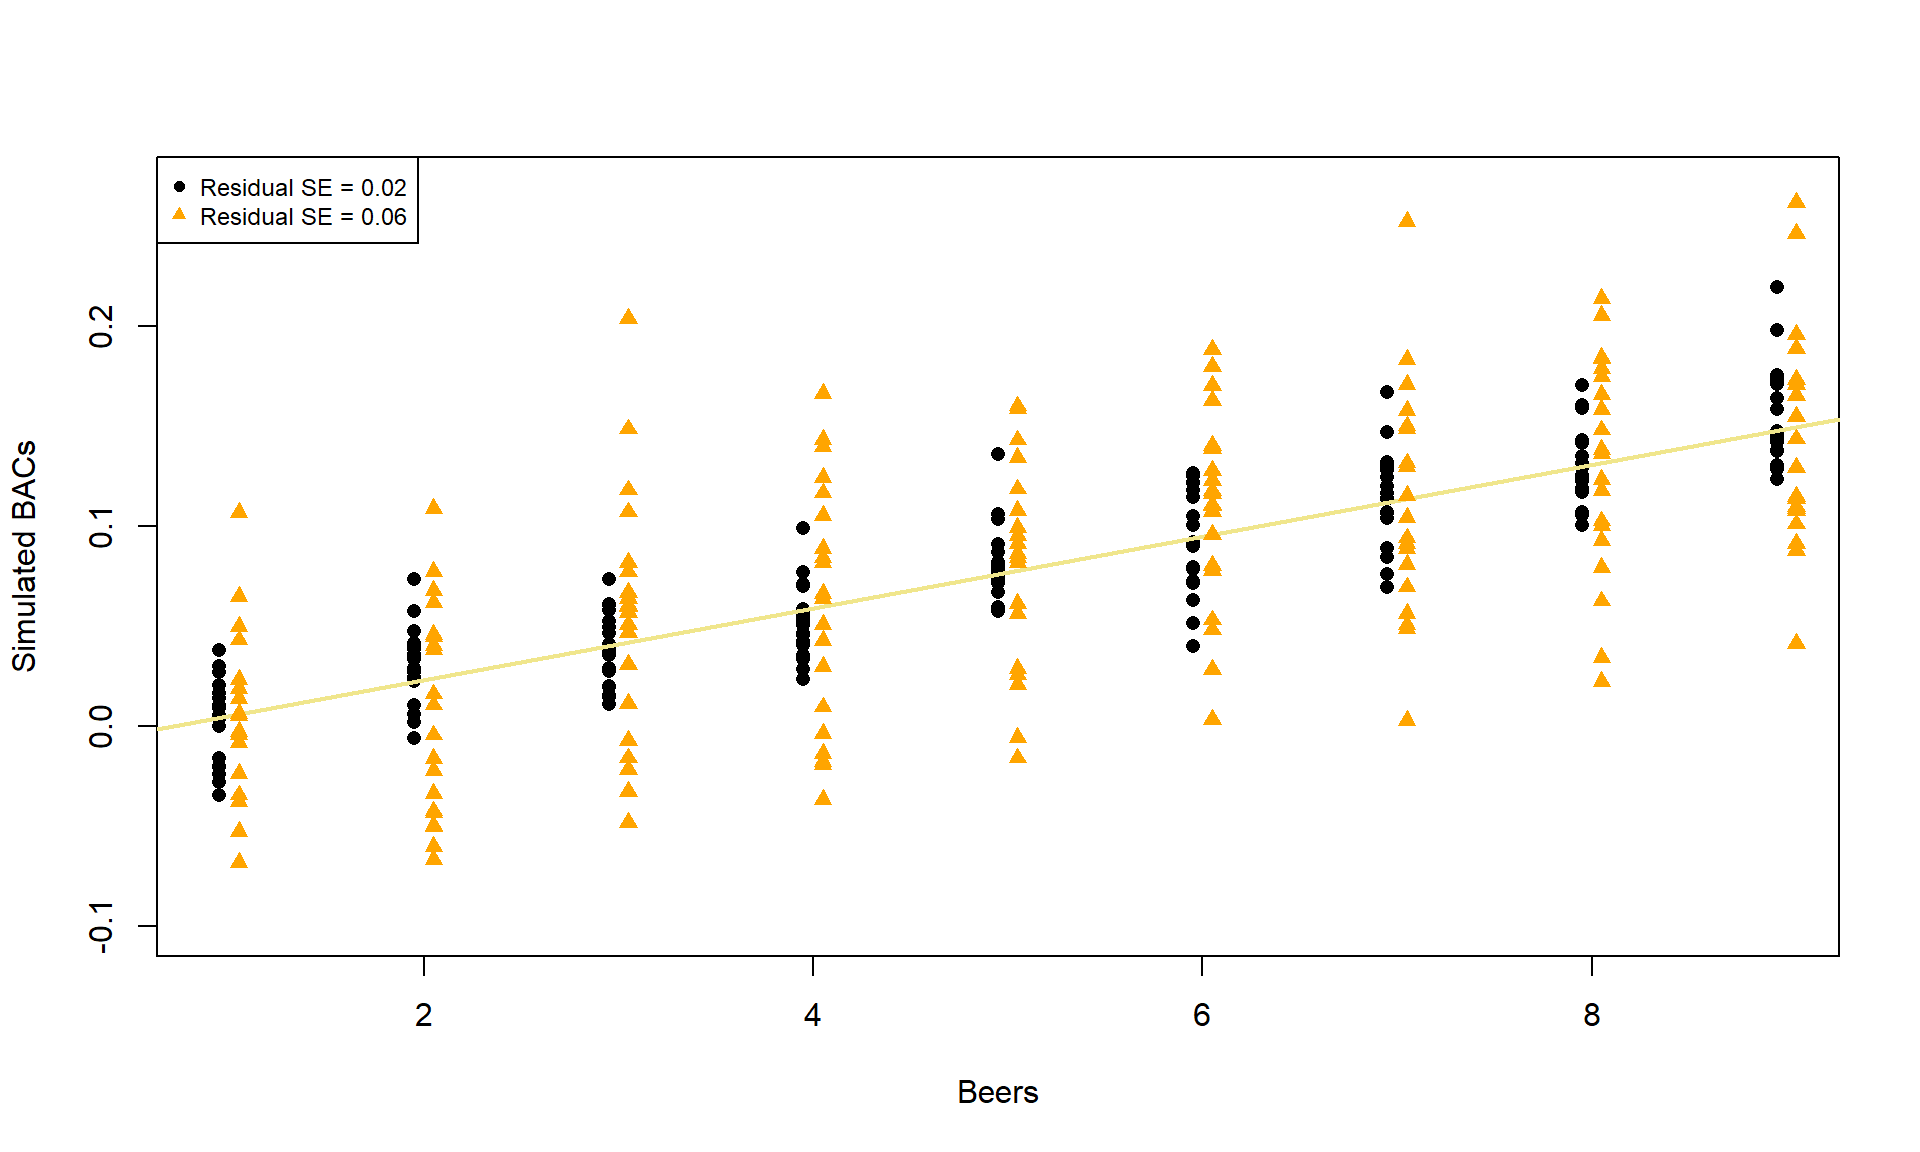 Simulated data for Beers and BAC assuming two different residual standard errors (0.02 and 0.06).